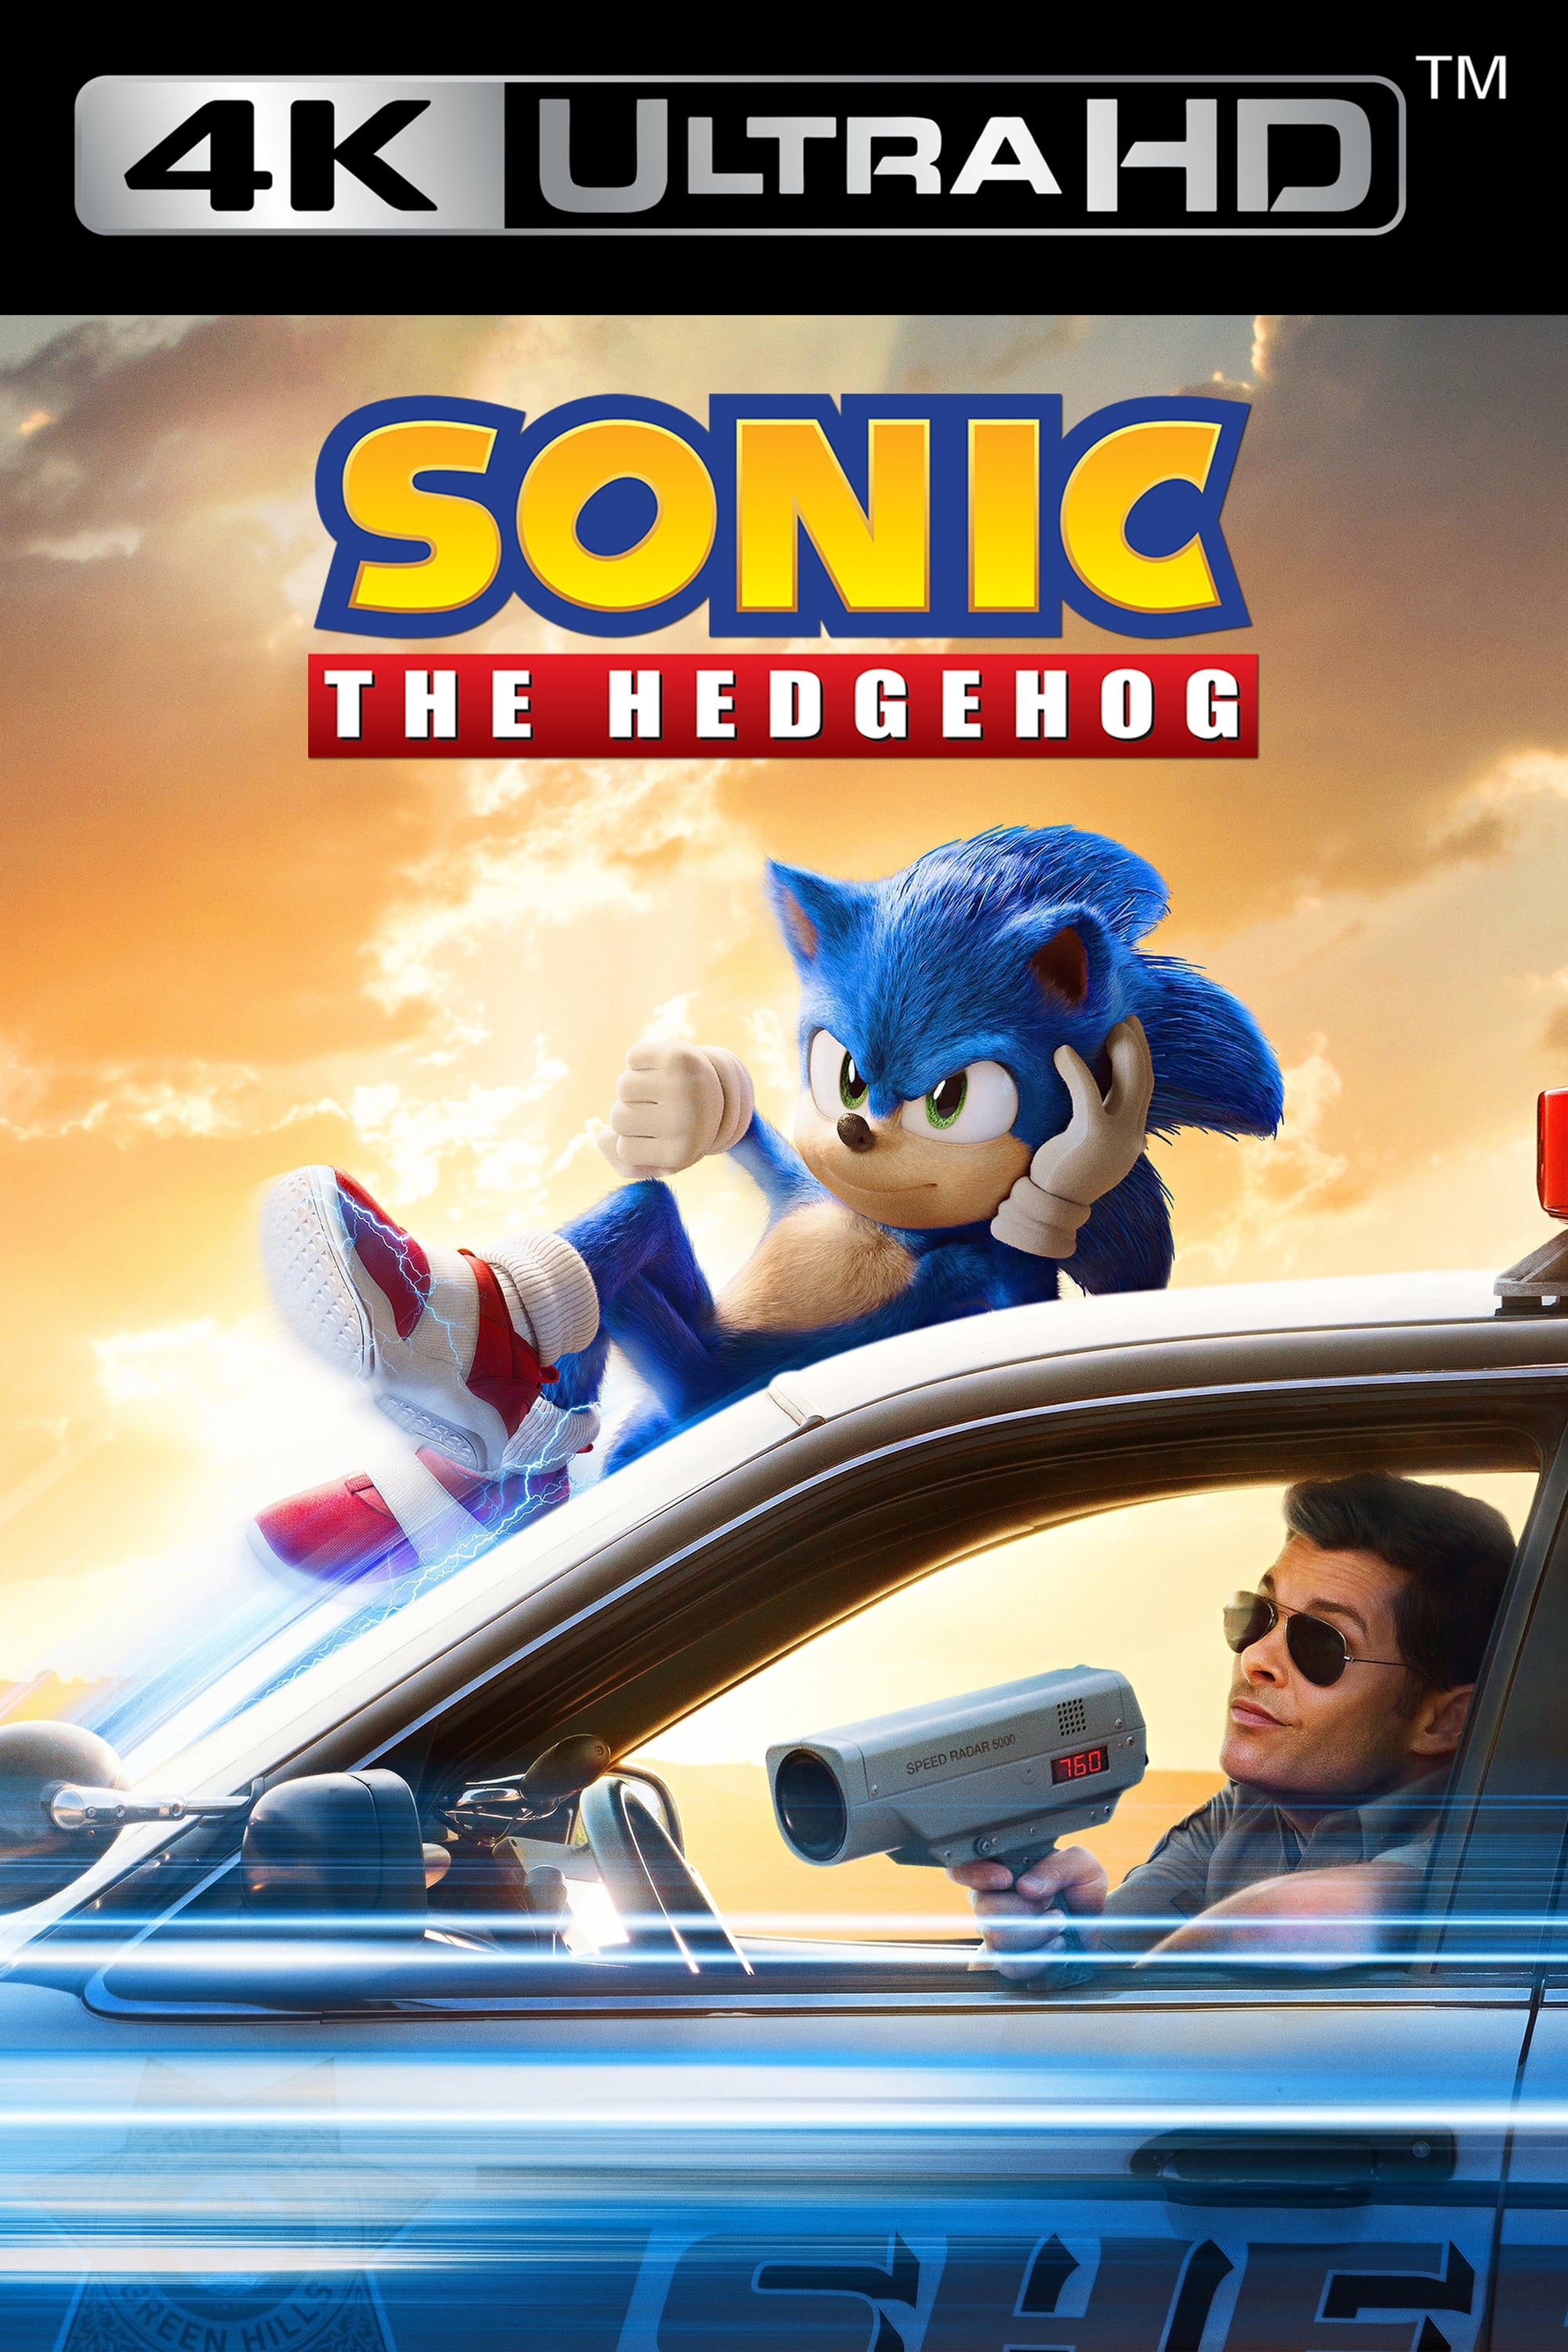 Sonic the Hedgehog Movie poster